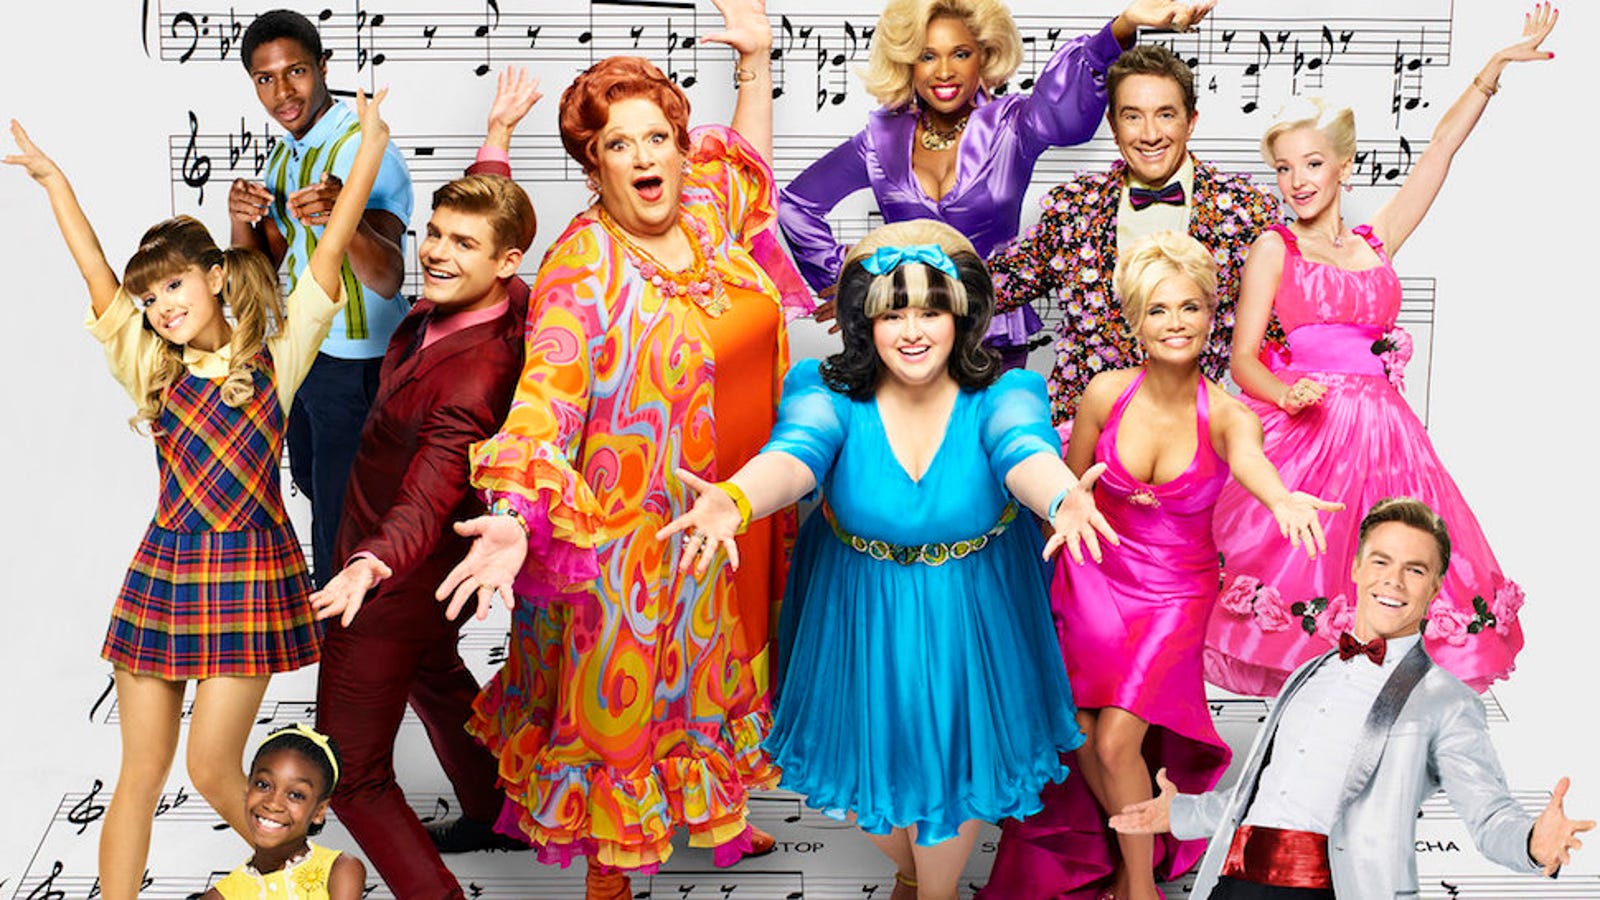 NBC's Hairspray Live! Event Might Not Be Terrible